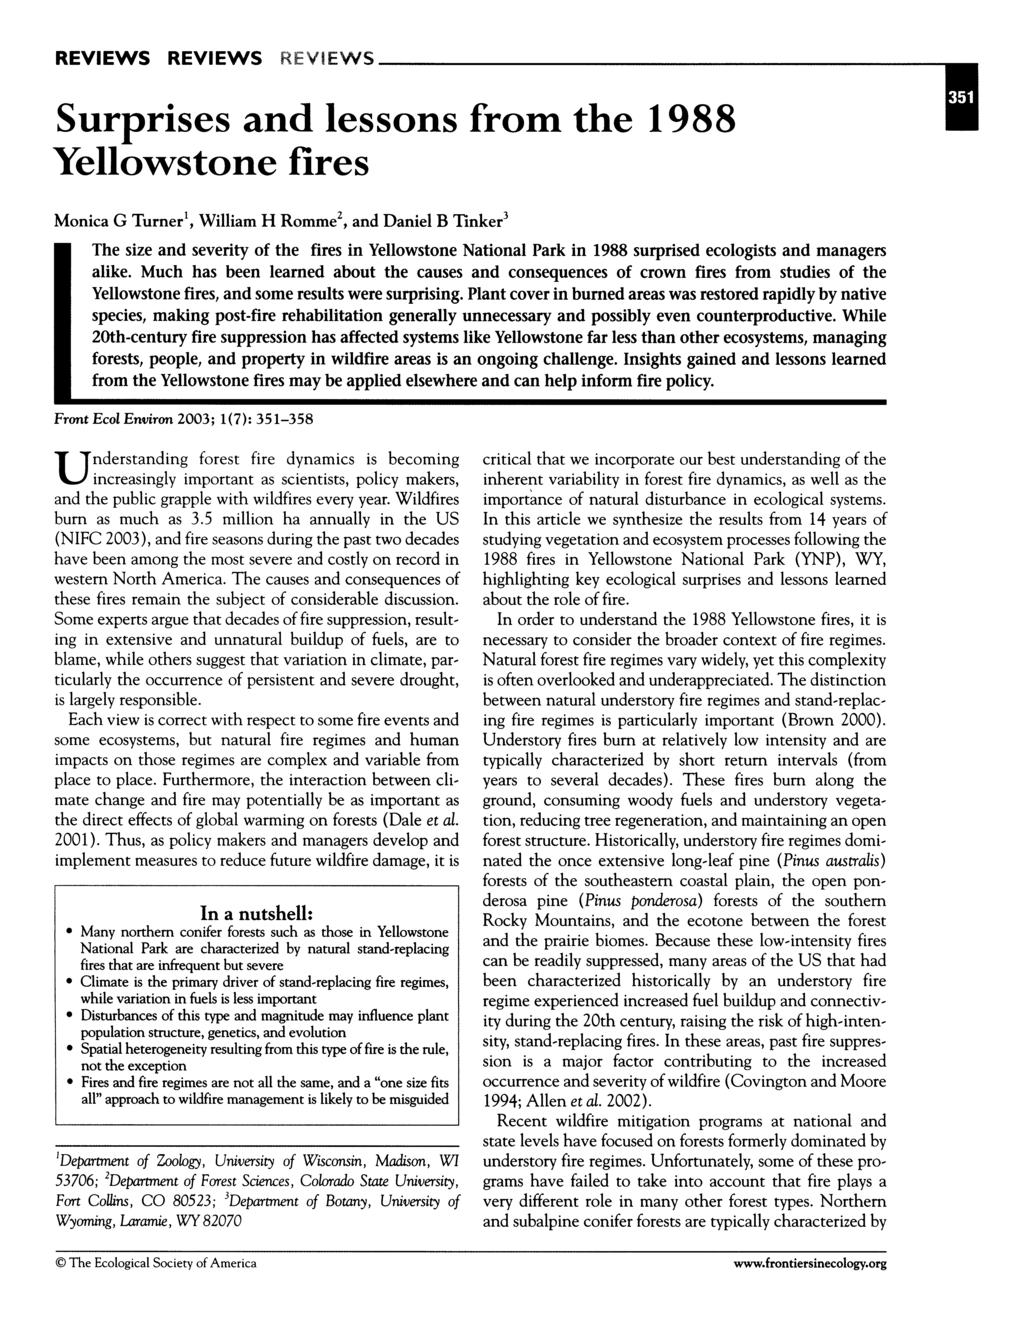 REVIEWS REVIEWS REVIl Surprises and lessons from the 1988 Monica G Turner1, William H Romme2, and Daniel B Tinker3 The size and severity of the fires in Yellowstone National Park in 1988 surprised